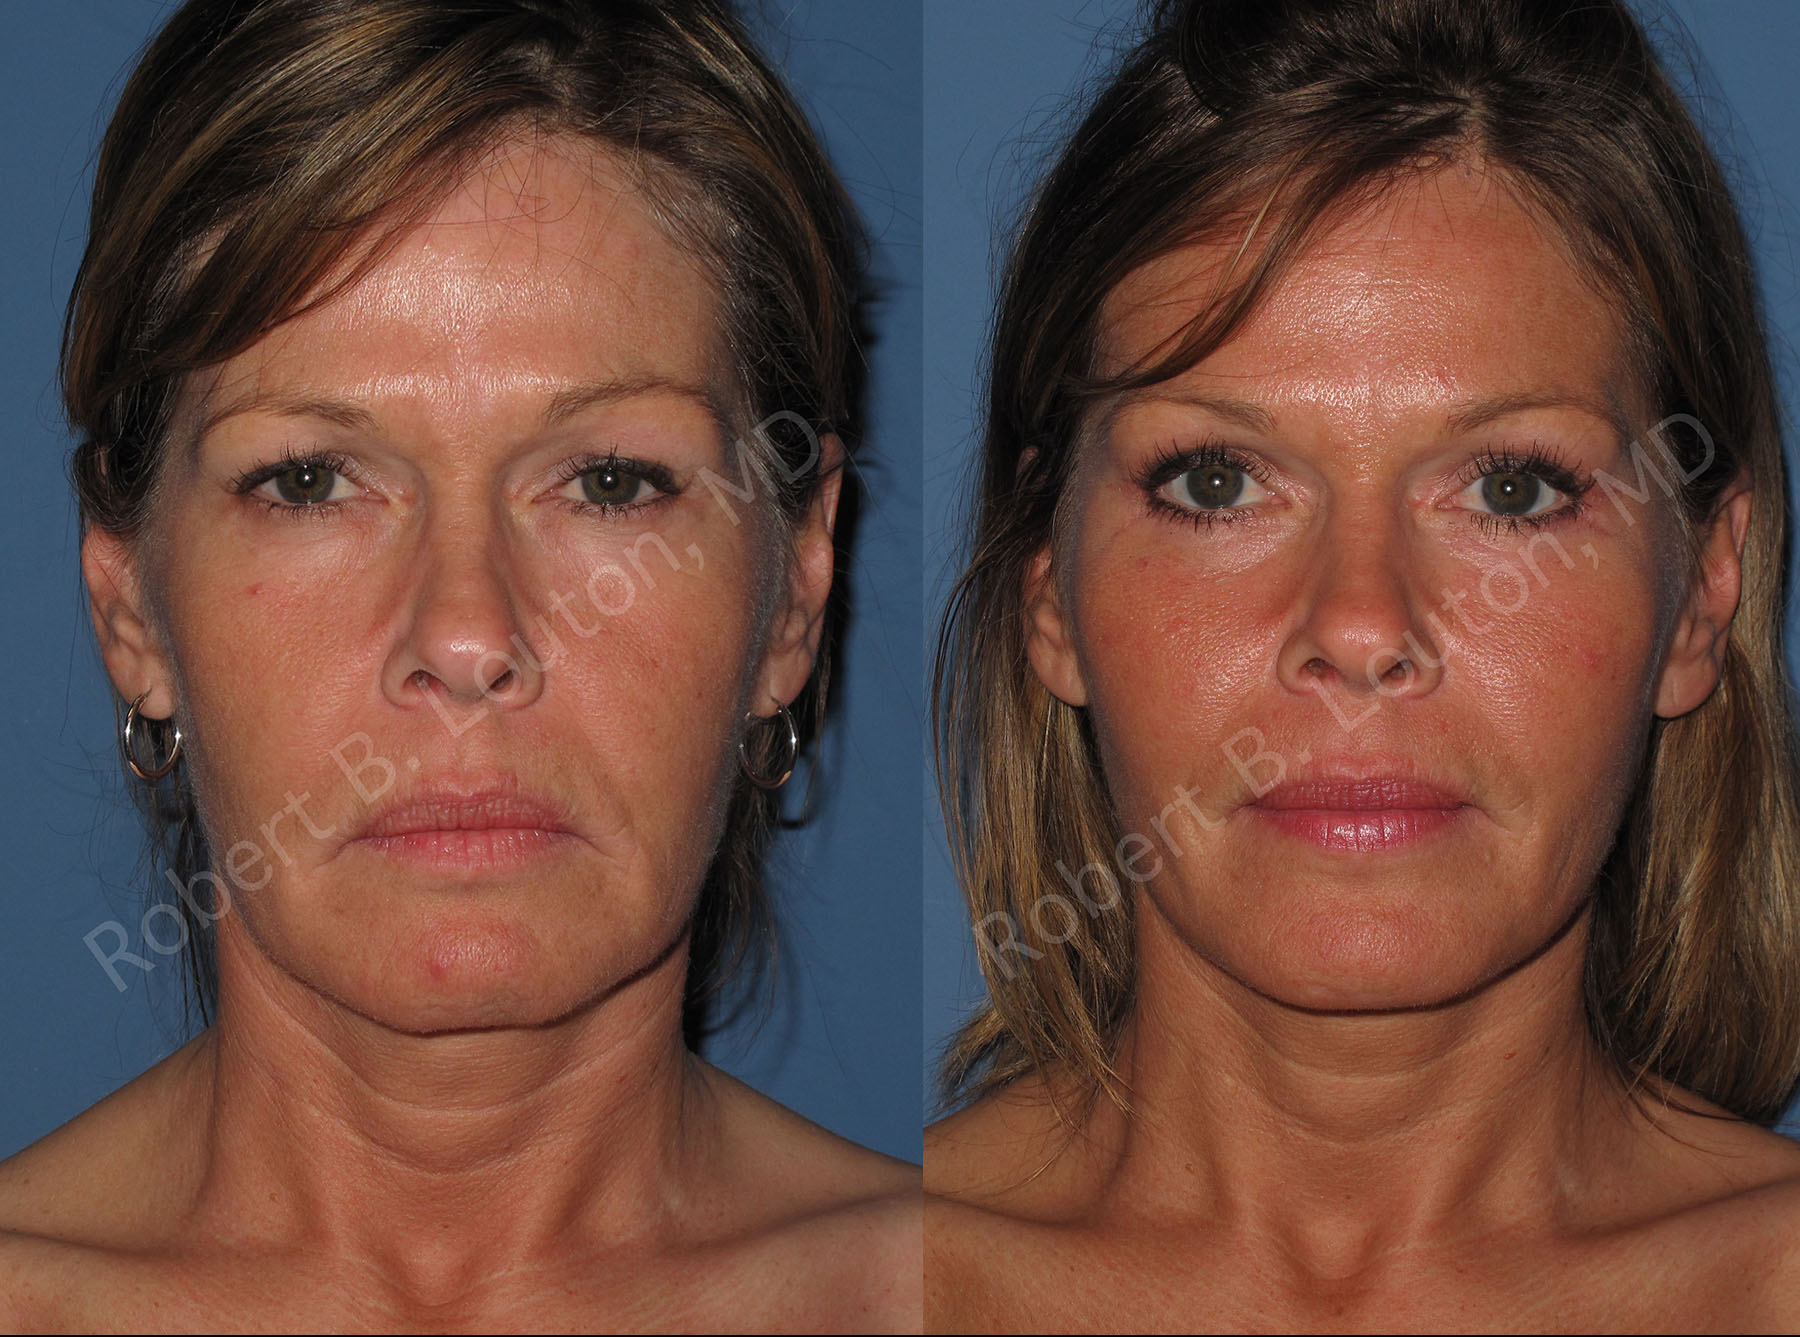 endoscopic facelift before and after - Dr. Robert Louton, Blair Plastic Surgery